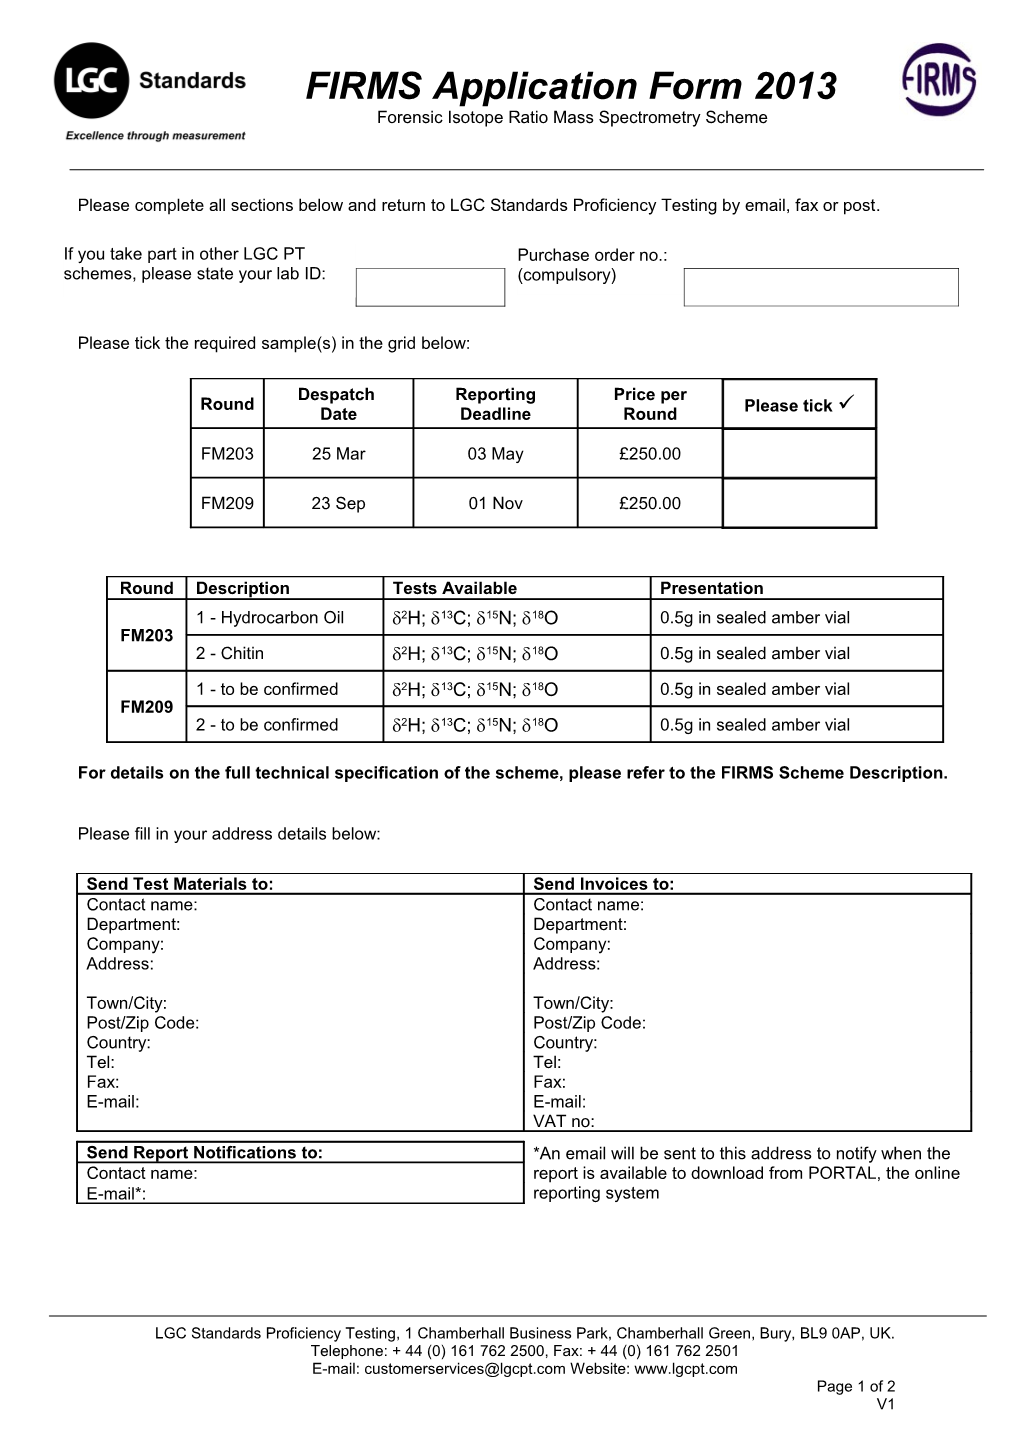 For Inclusion in the Aquacheck Scheme Please Complete and Return This Form for the Attention s1